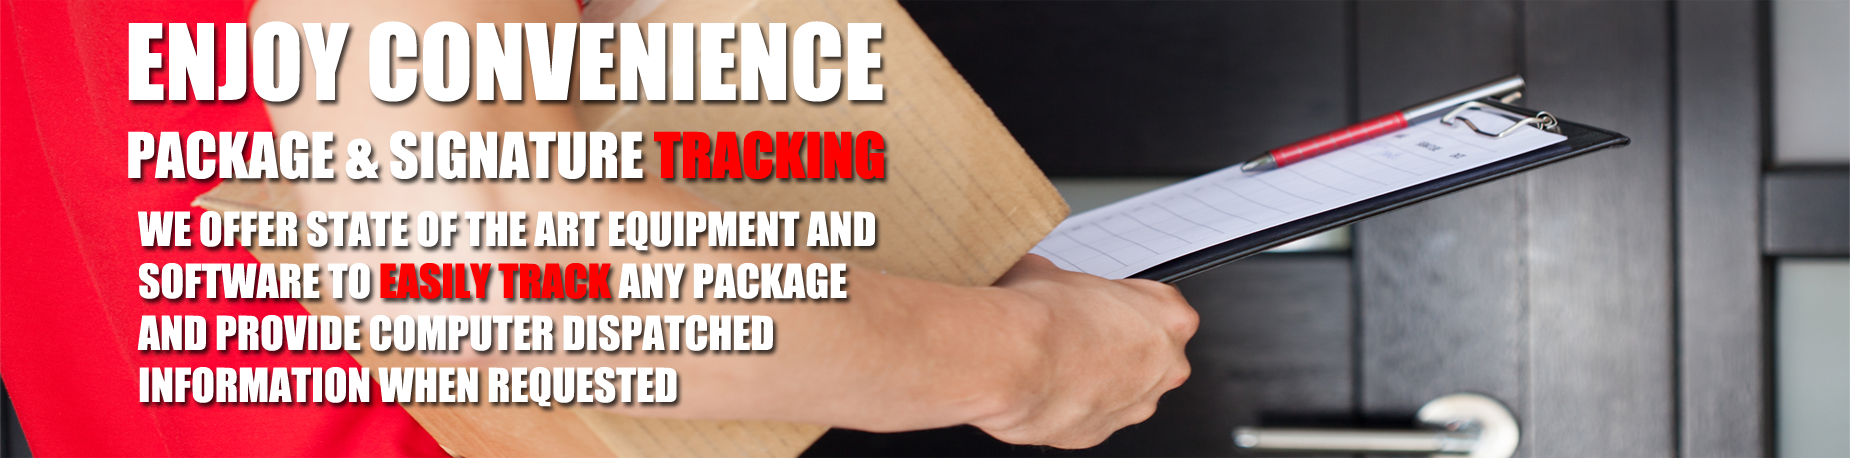 Package and Signature Tracking